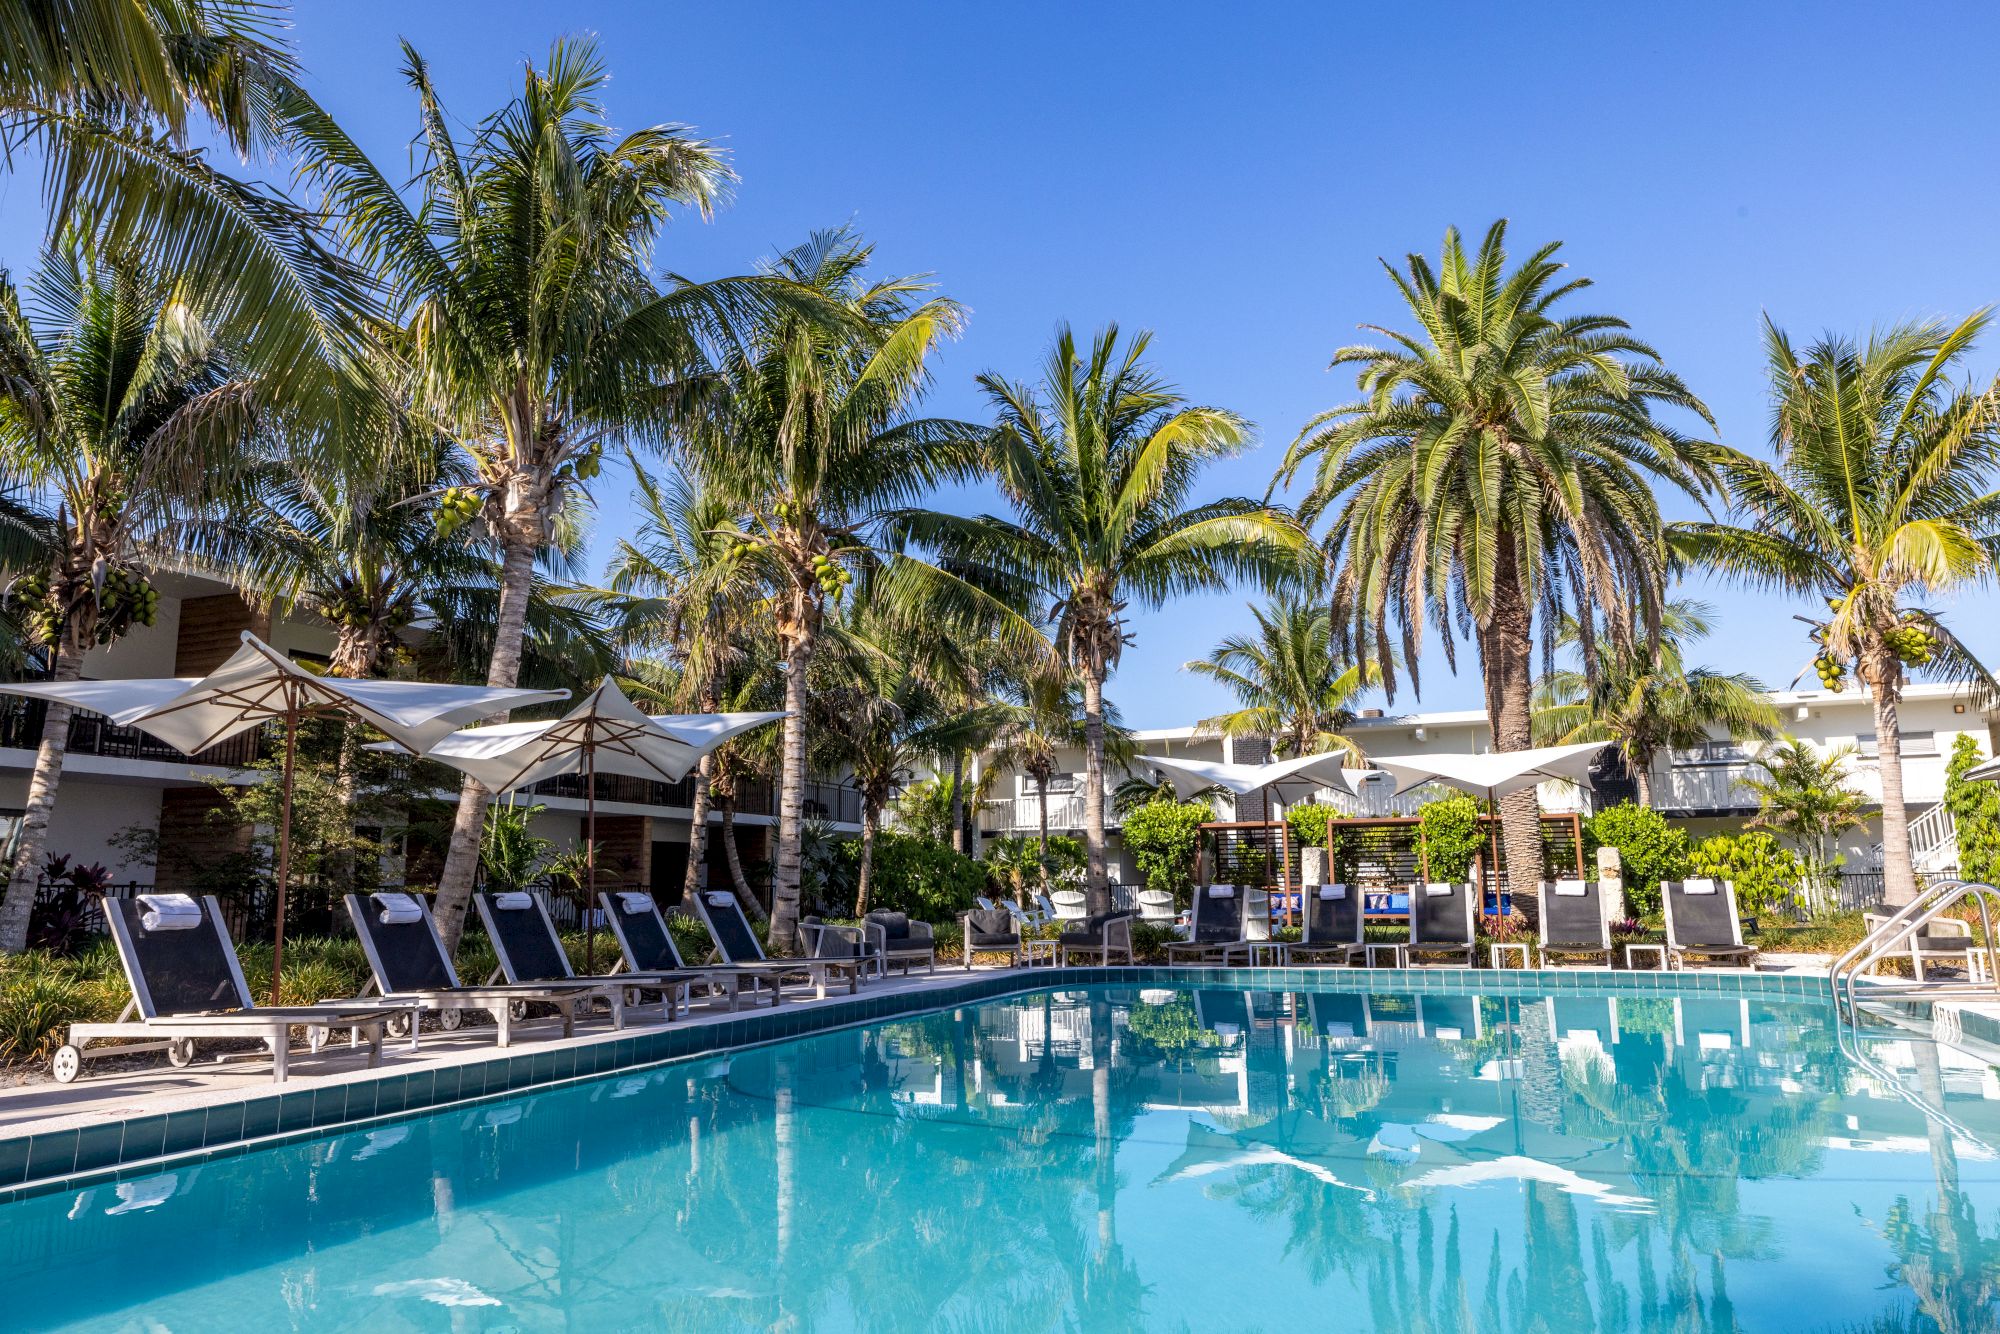 The image shows a tropical resort pool area with palm trees, lounge chairs, and umbrellas under a clear blue sky.